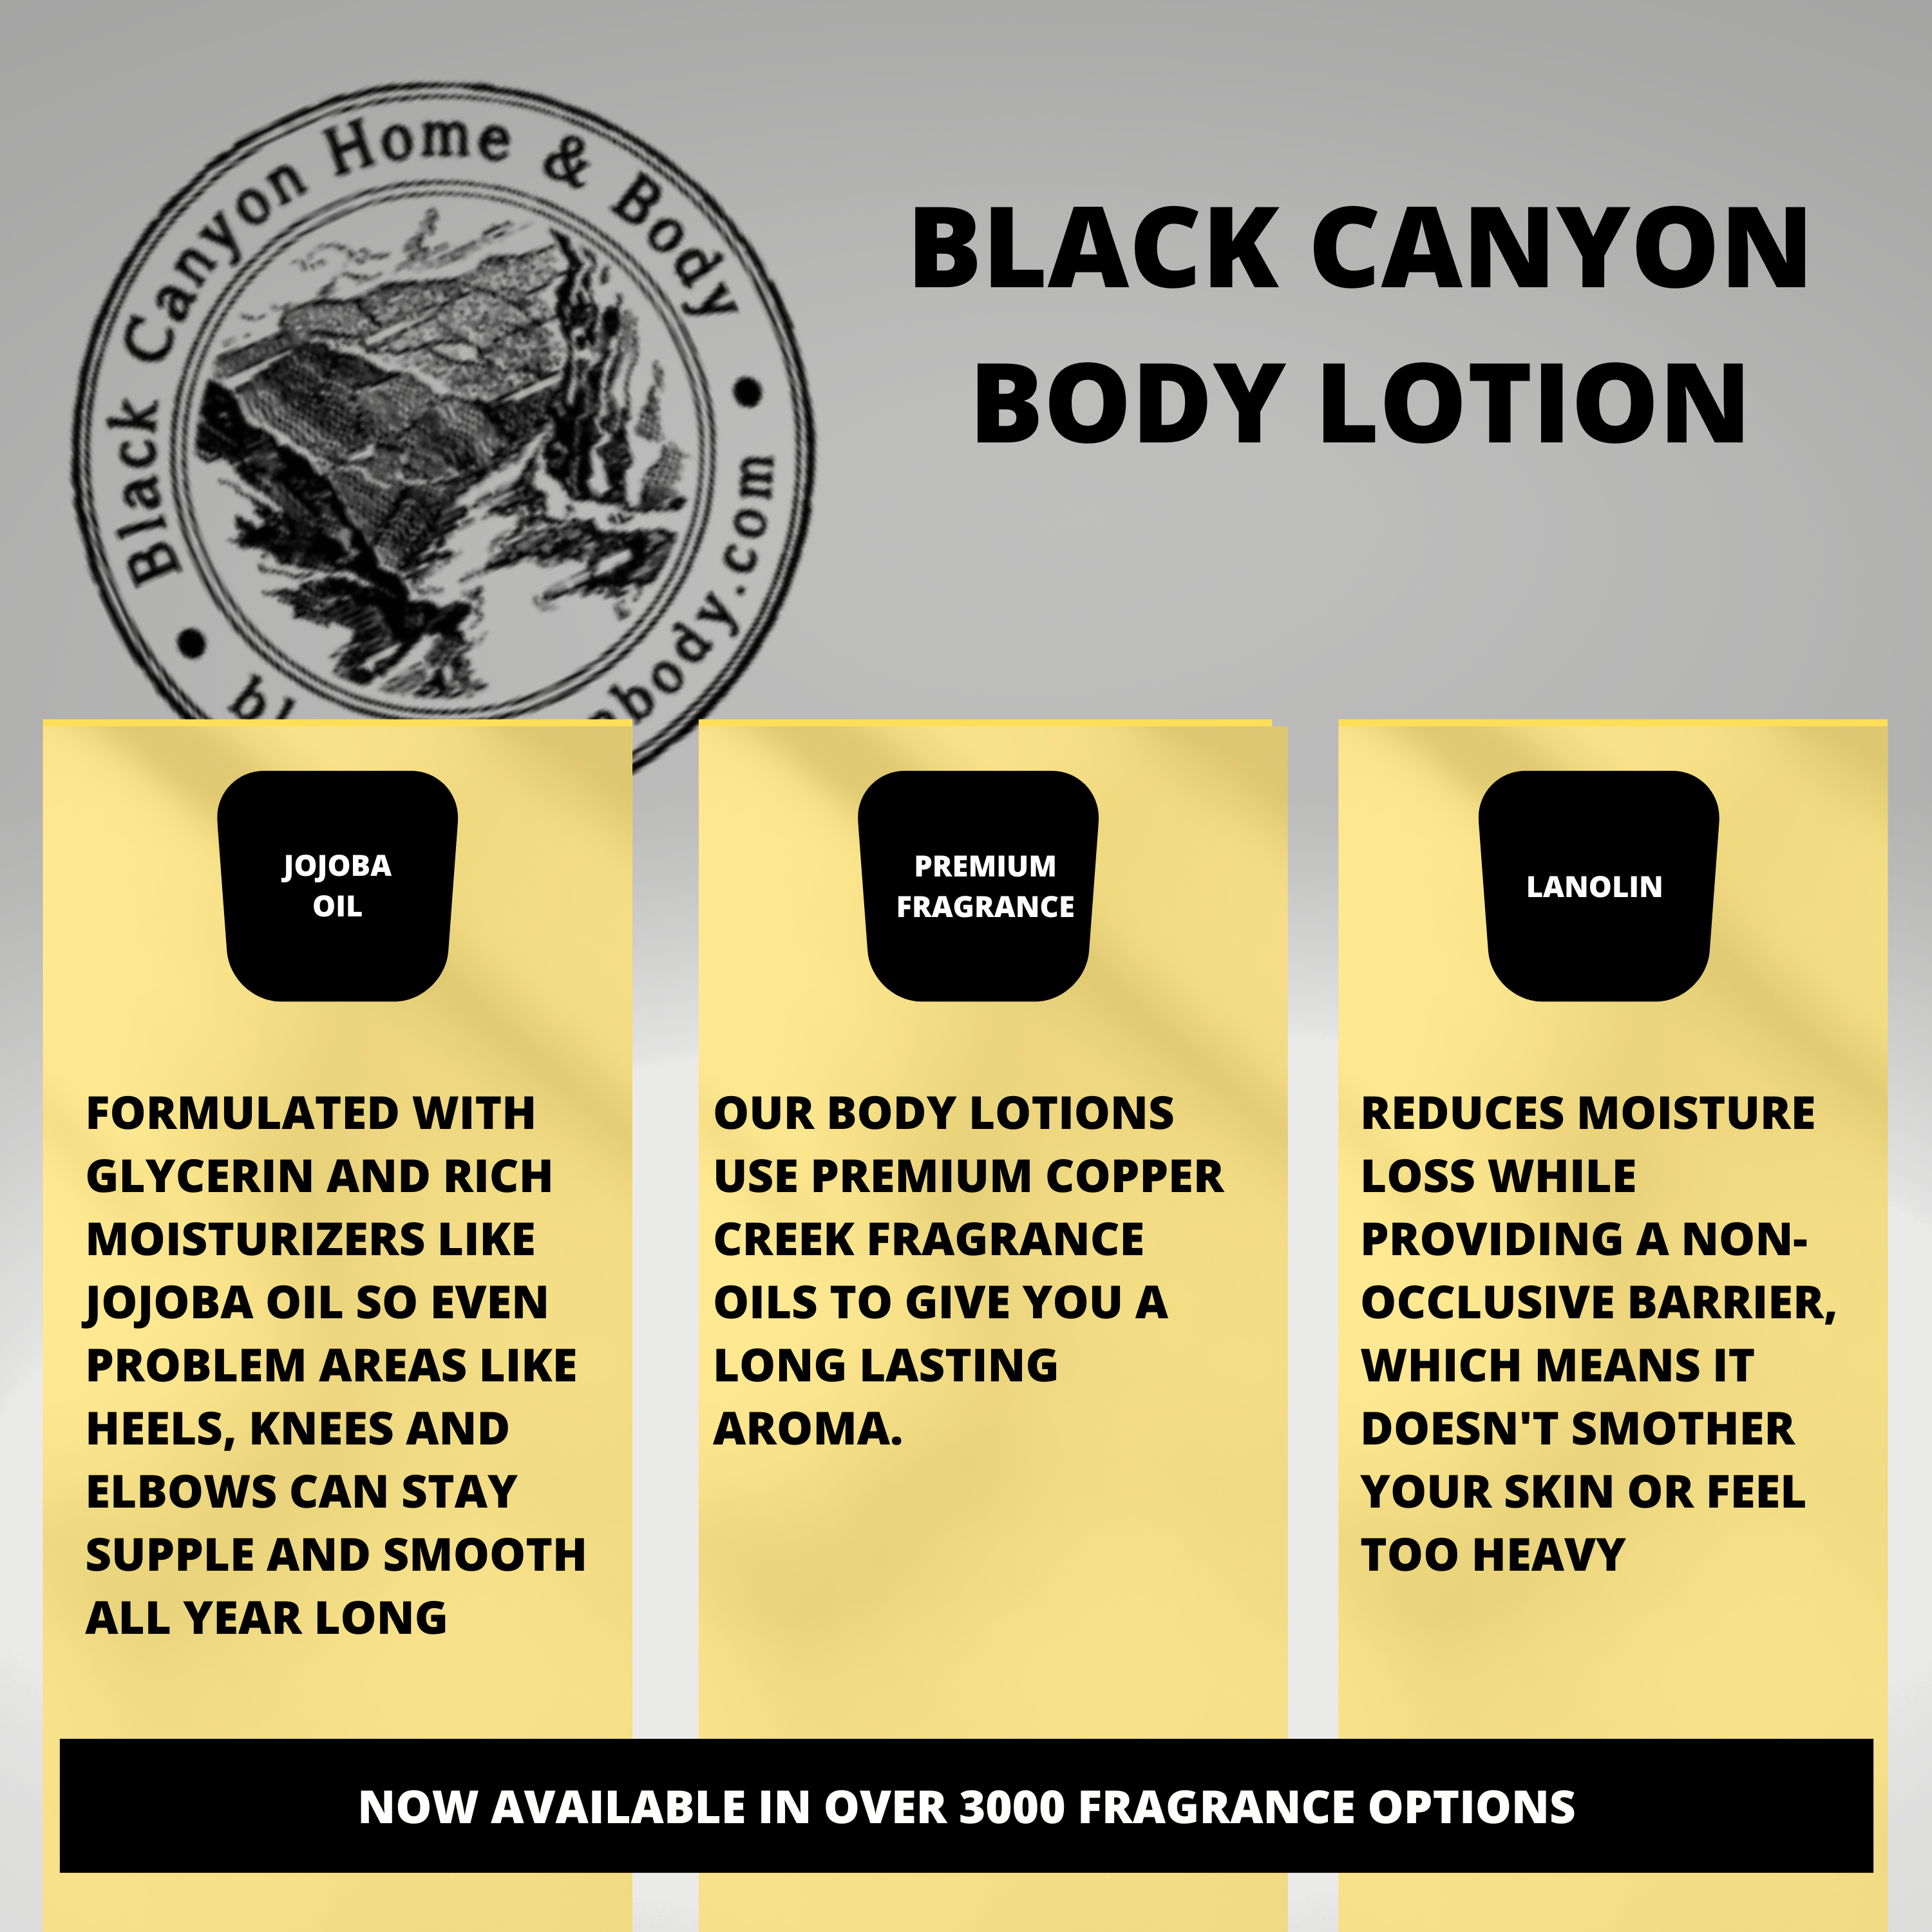 Black Canyon Black Licorice Scented Luxury Body Lotion with Lanolin and Jojoba Oil